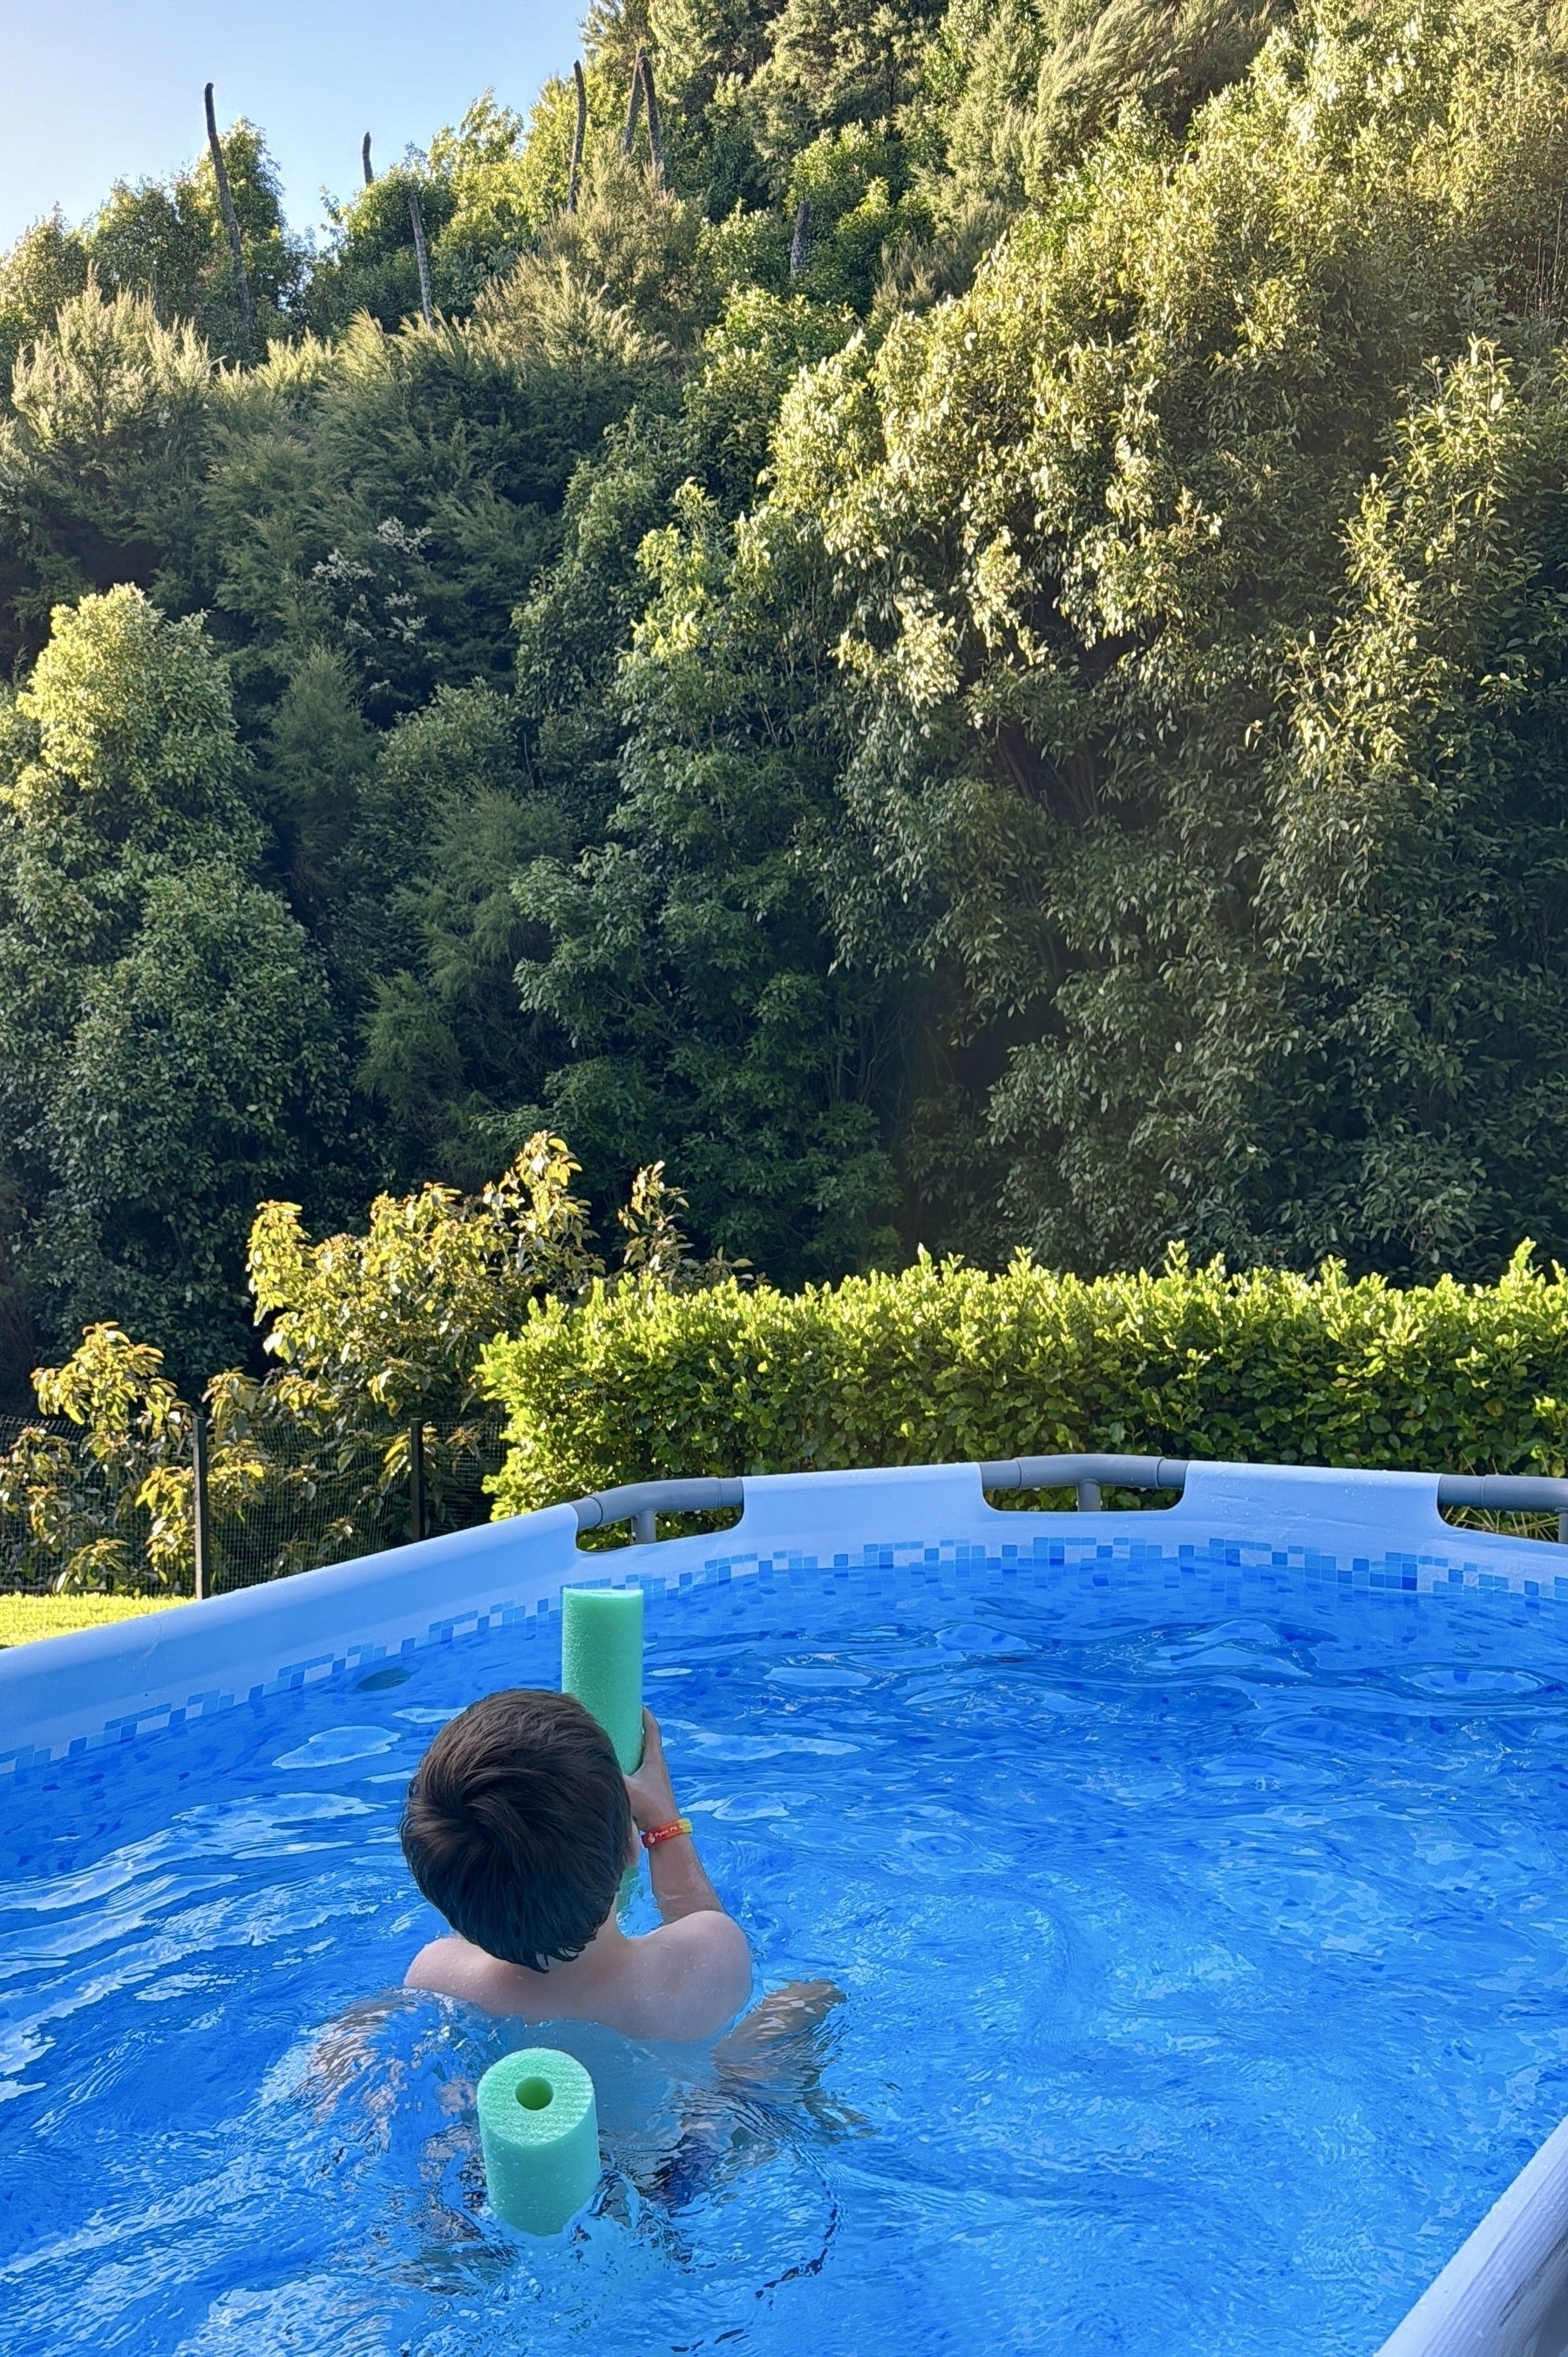 My son in a pool on a hot summer’s day